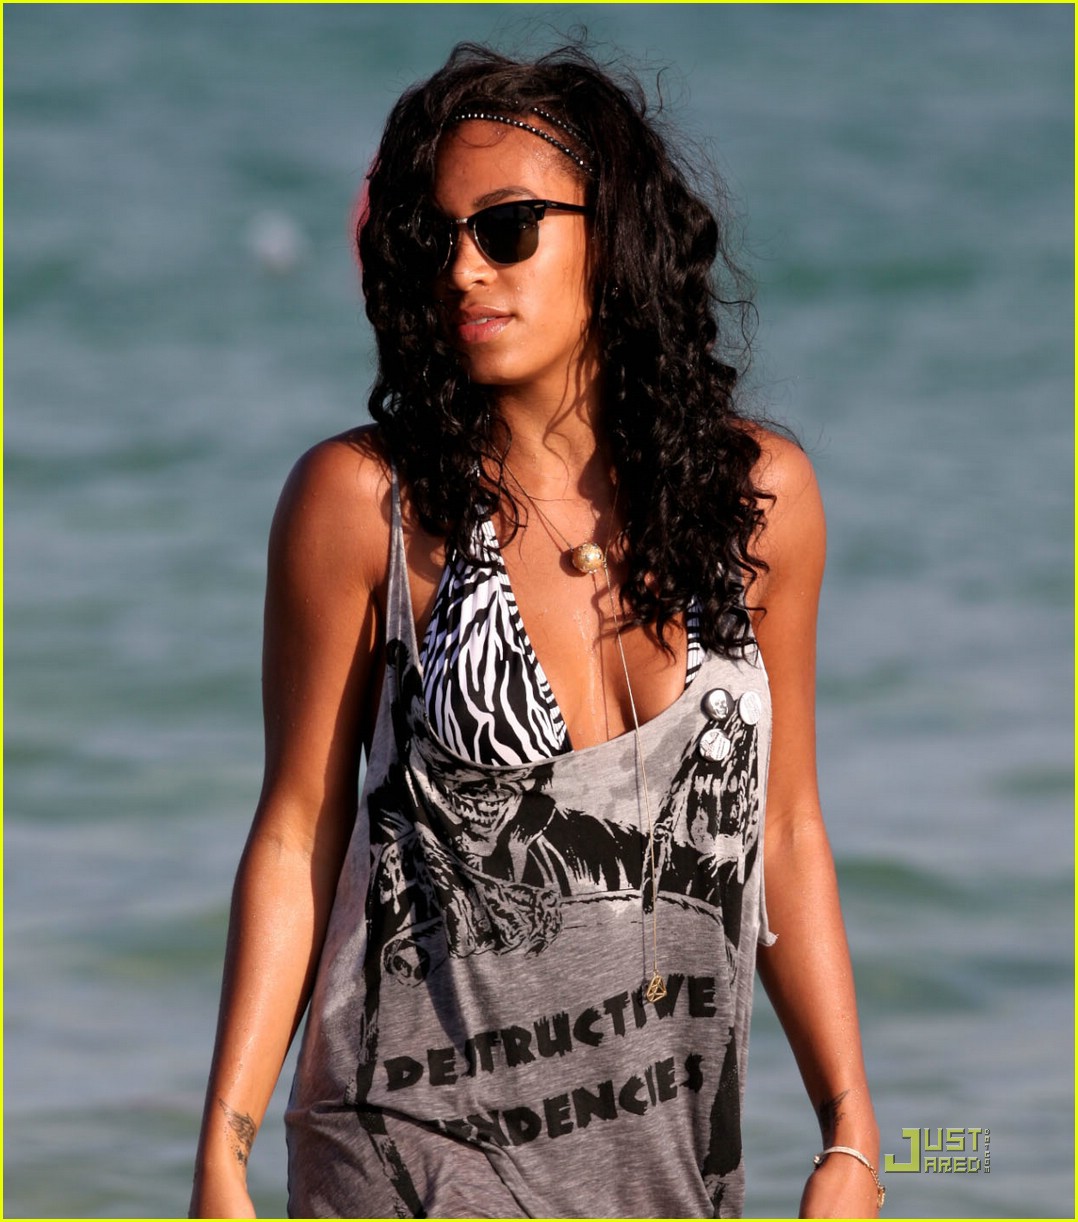 General photo of Solange Knowles